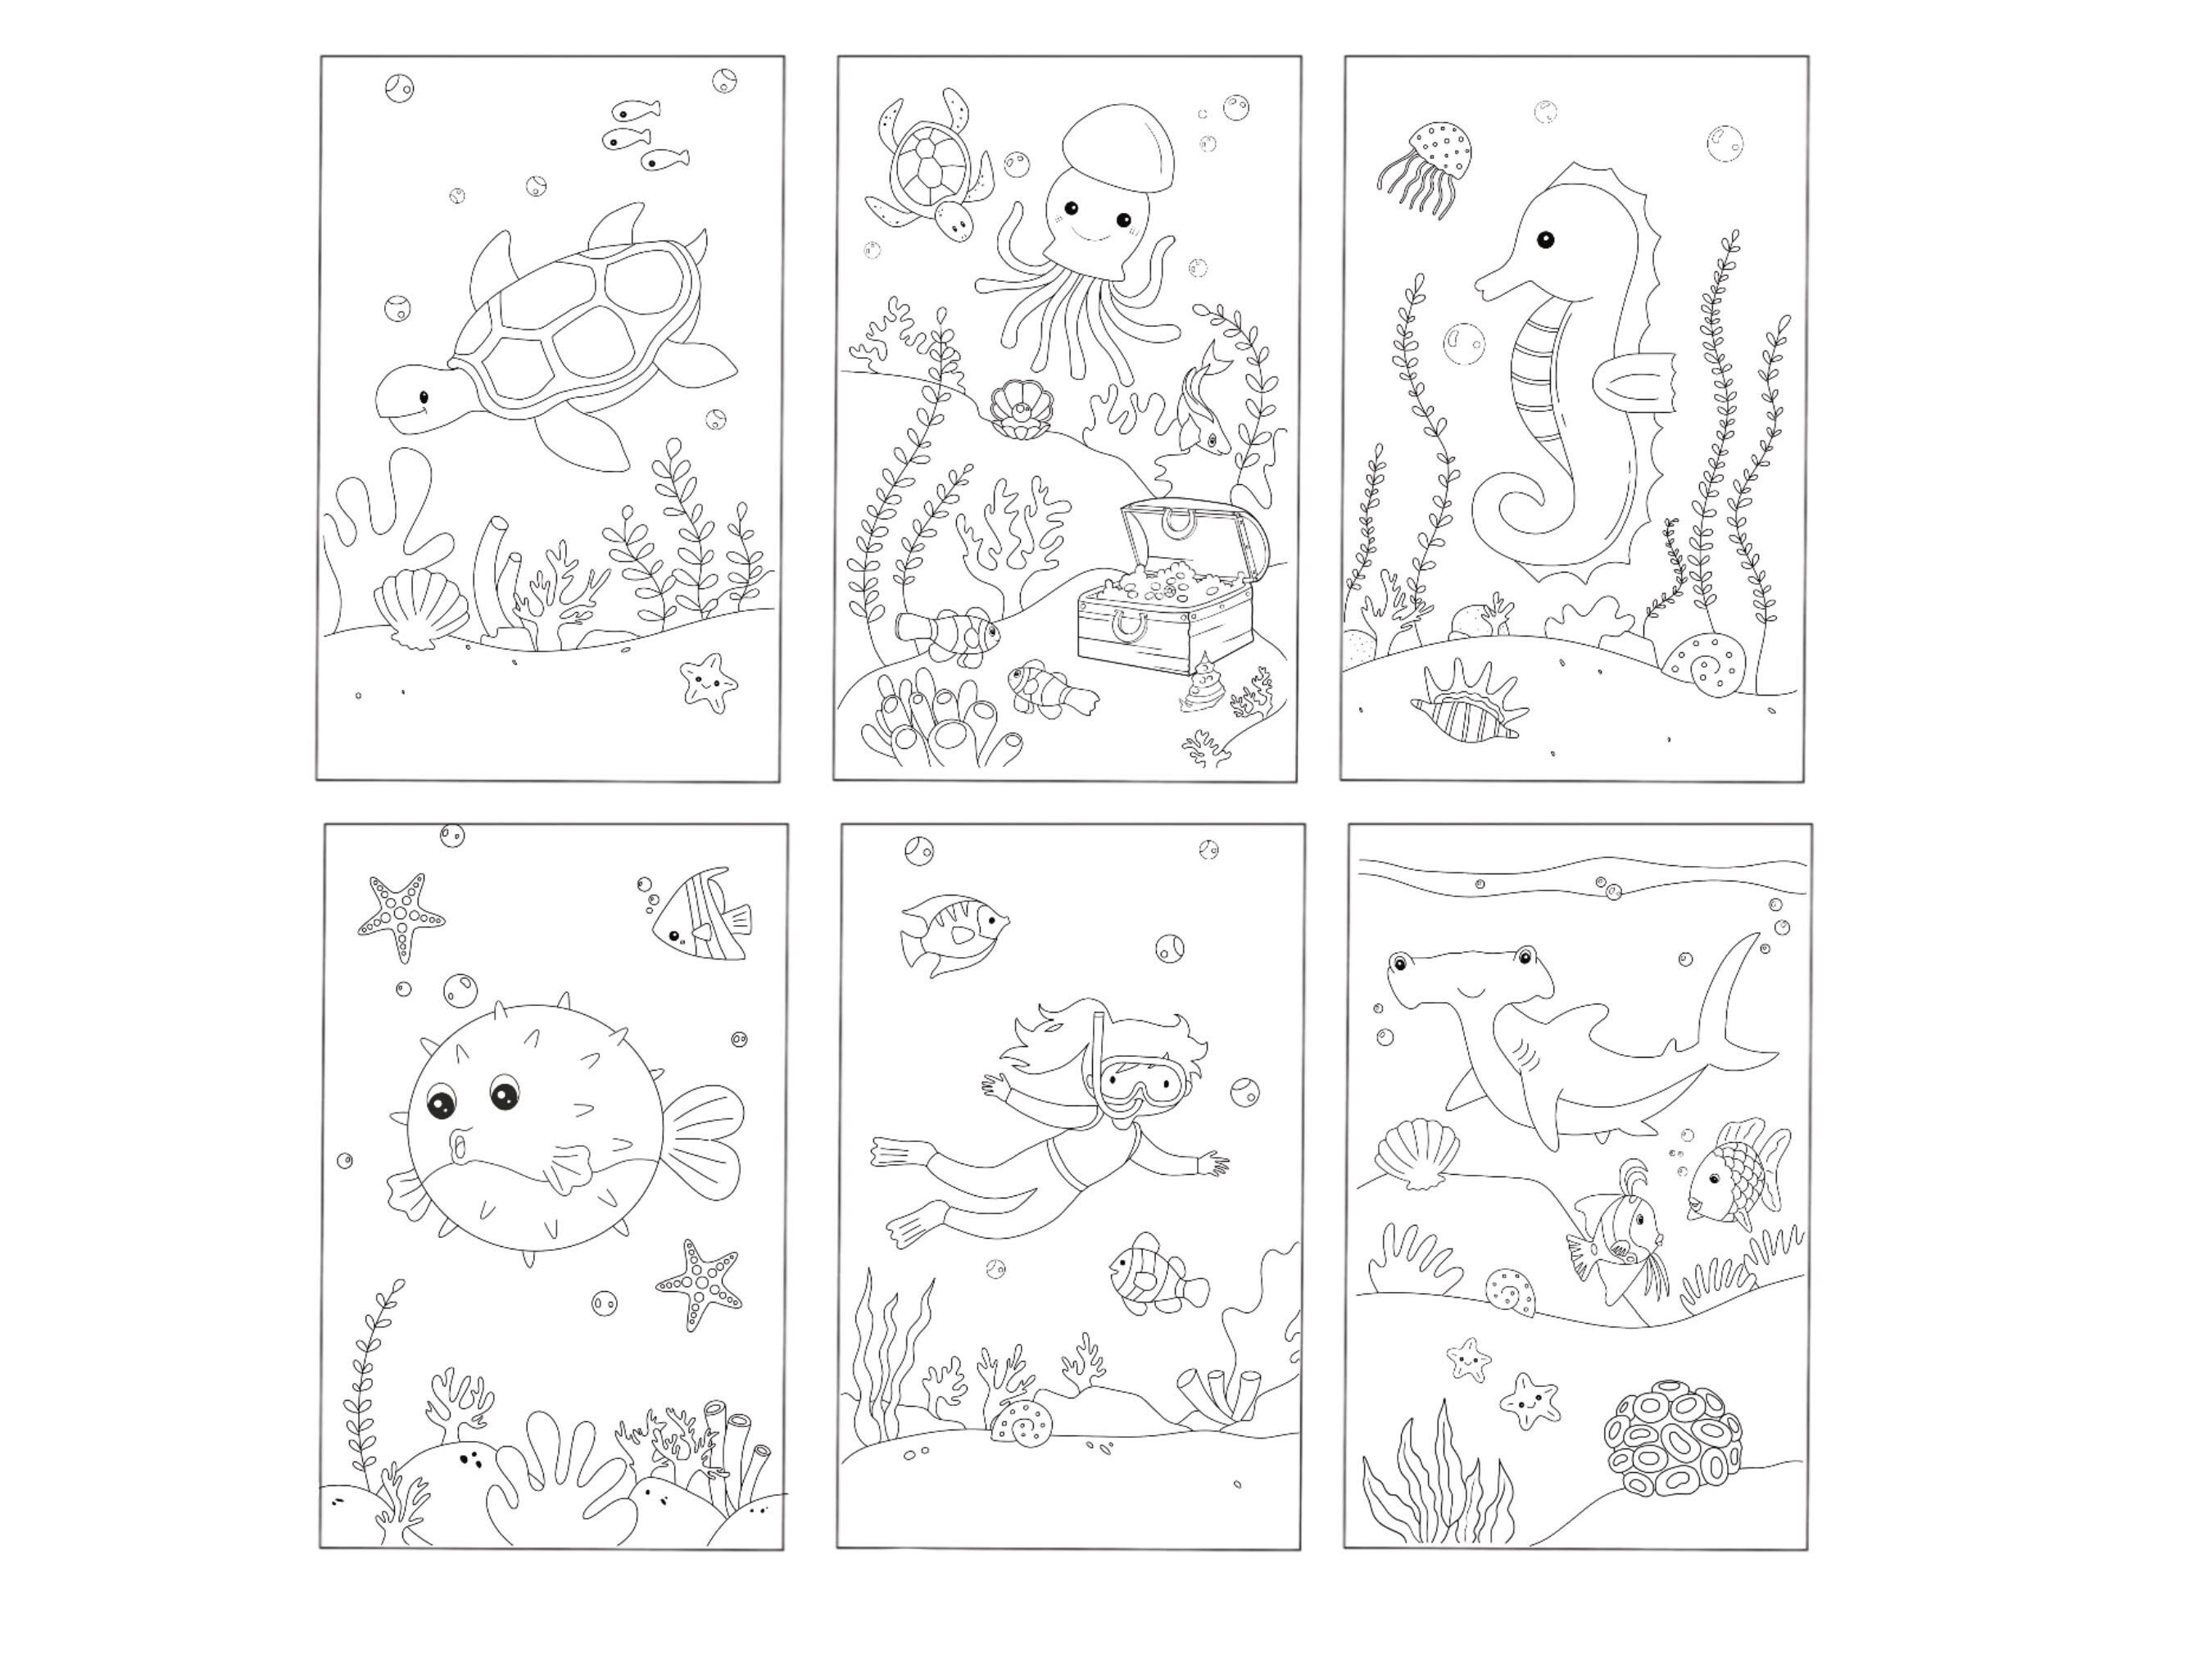 Super+Cute+Sea+Creatures+Coloring+Book+for+Kids+-+Coloring+Books+5+Year+Old+Edition+by+Activibooks+For+Kids+%282016%2C+Trade+Paperback%29  for sale online